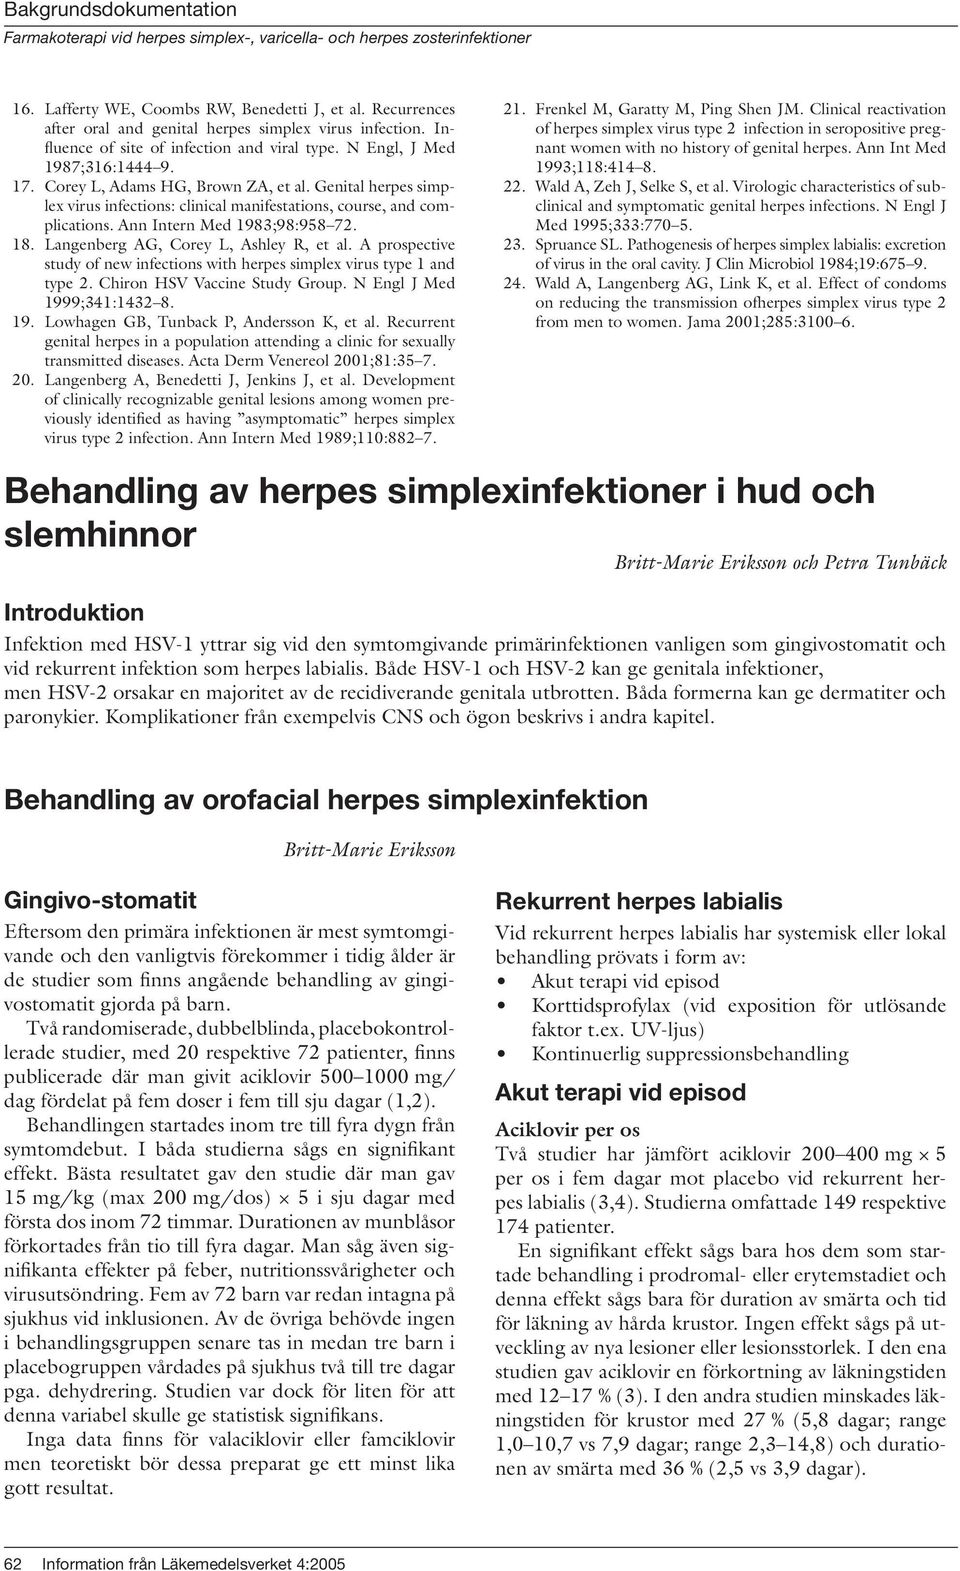 Langenberg AG, Corey L, Ashley R, et al. A prospective study of new infections with herpes simplex virus type 1 and type 2. Chiron HSV Vaccine Study Group. N Engl J Med 199